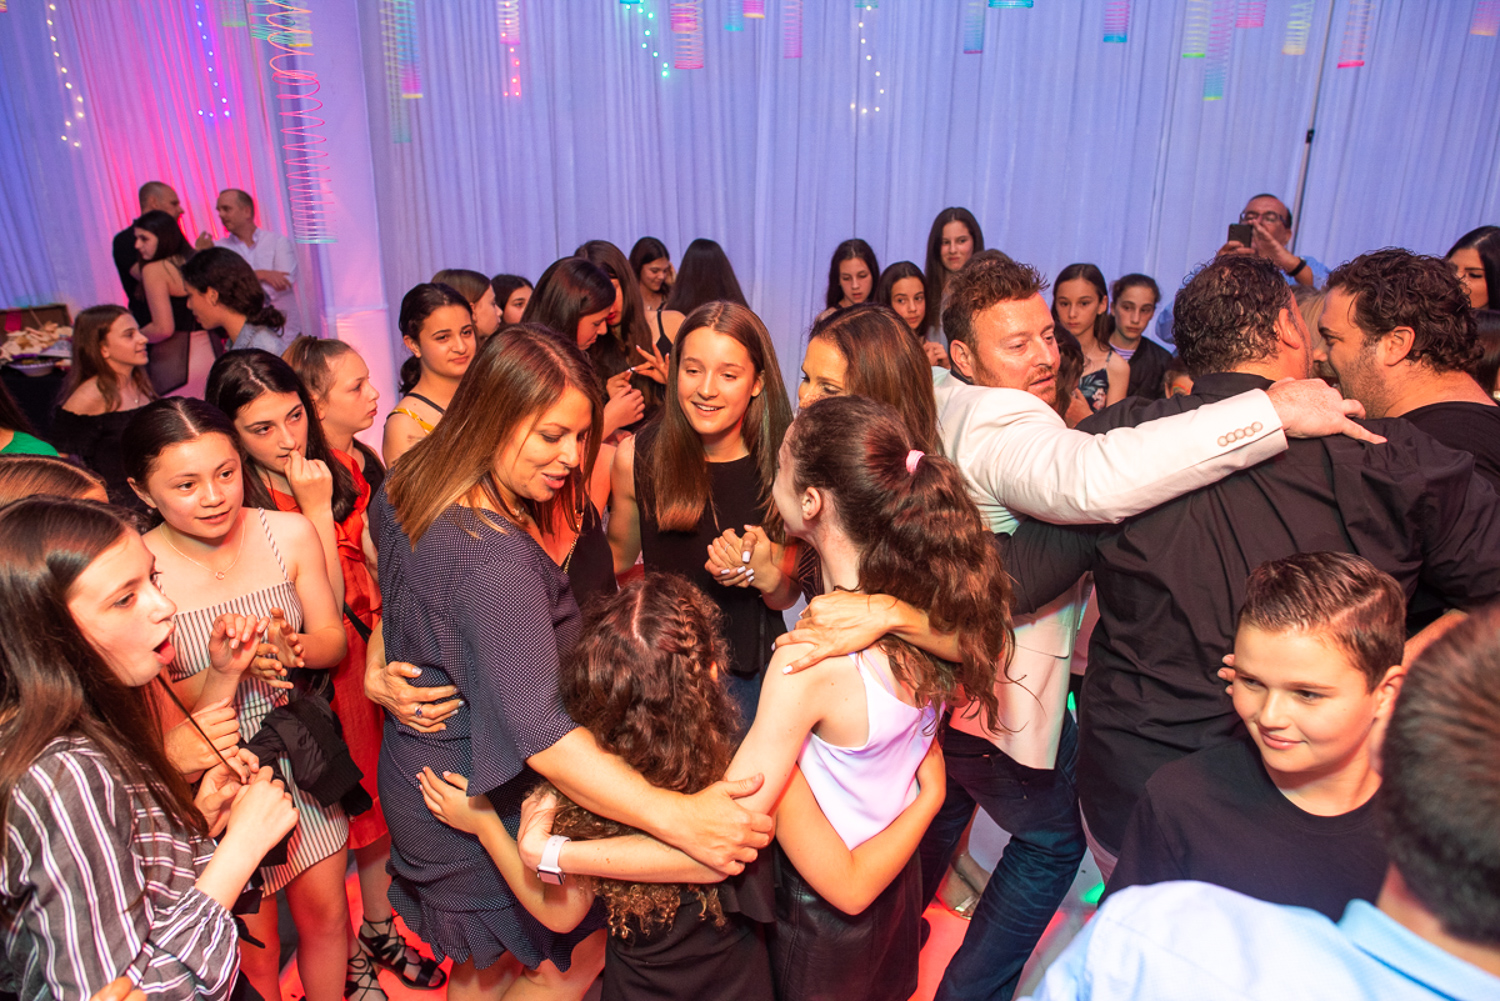 full dance floor with white draping in background during bat mitzvah